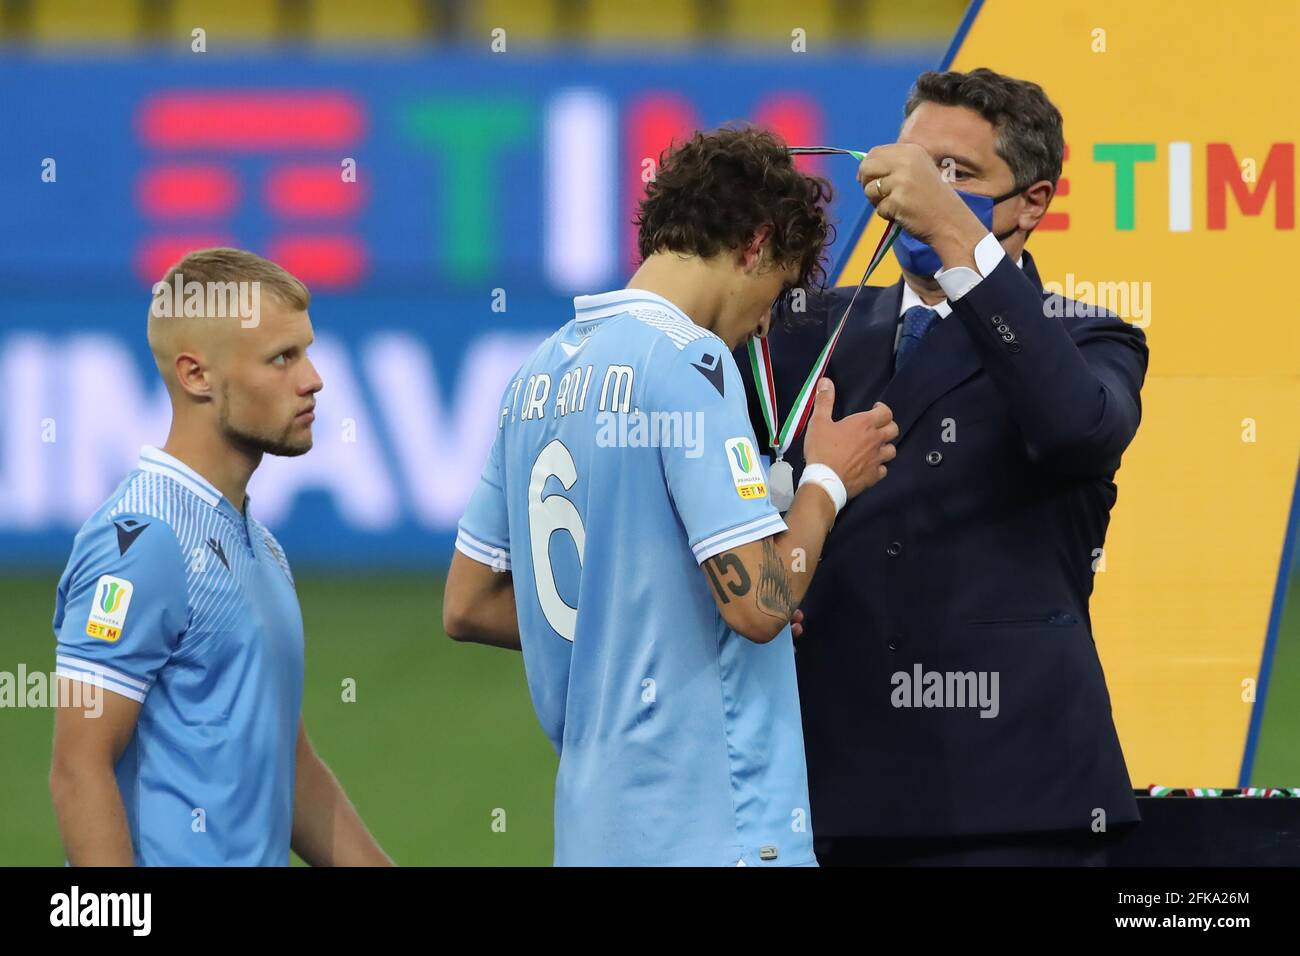 Parma, Italy, 28th April 2021. Romano Floriani Mussolini of SS Lazio receives his runners' up medal from Luigi De Siervo Managing Director of Lega Serie A during the presentation trophy ceremony of the Primavera Coppa Italia match at Stadio Ennio Tardini, Parma. Picture credit should read: Jonathan Moscrop / Sportimage Stock Photo